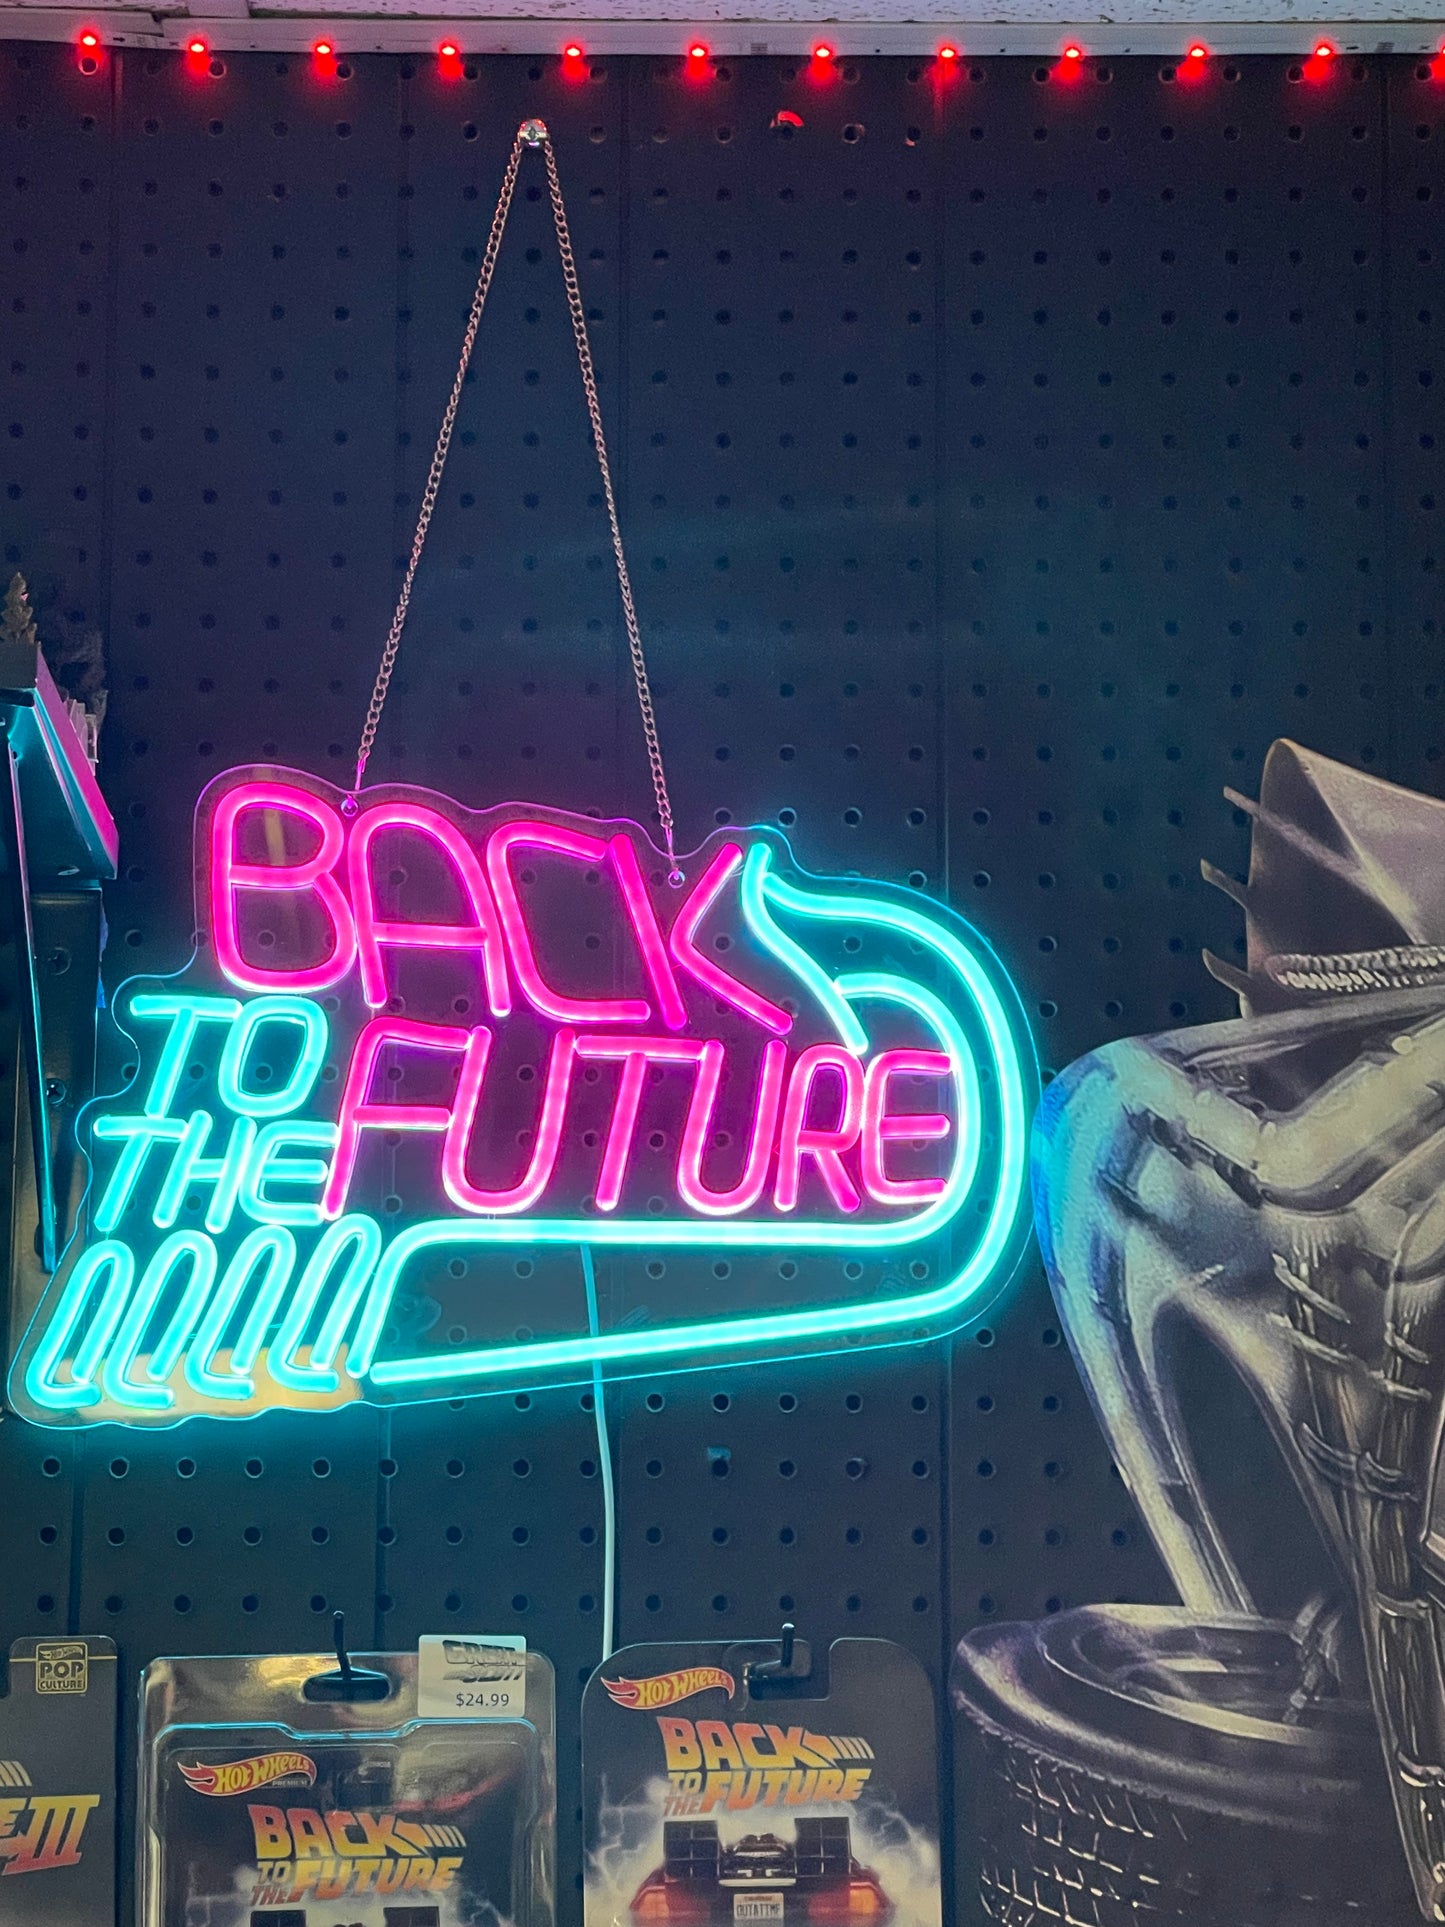 Back to the Future Neon LED Sign Wall Movie Theatre Decor 15.4 in by 10.2 in